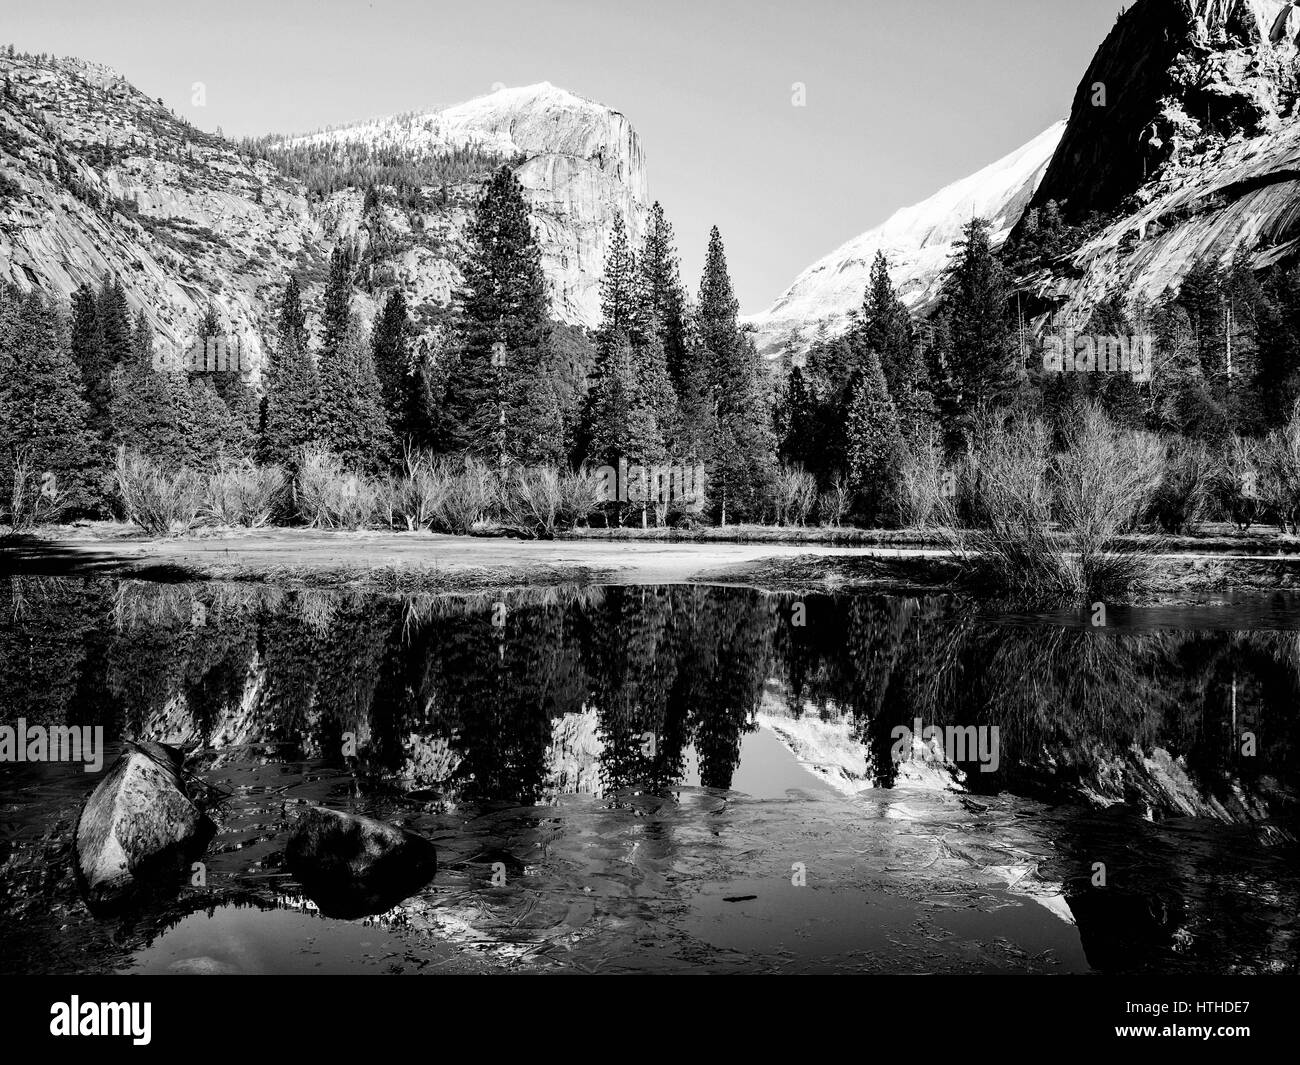 A view of Mirror Lake in the Yosemite Valley National Park using black and white photography in the style of Ansel Adams. Stock Photo